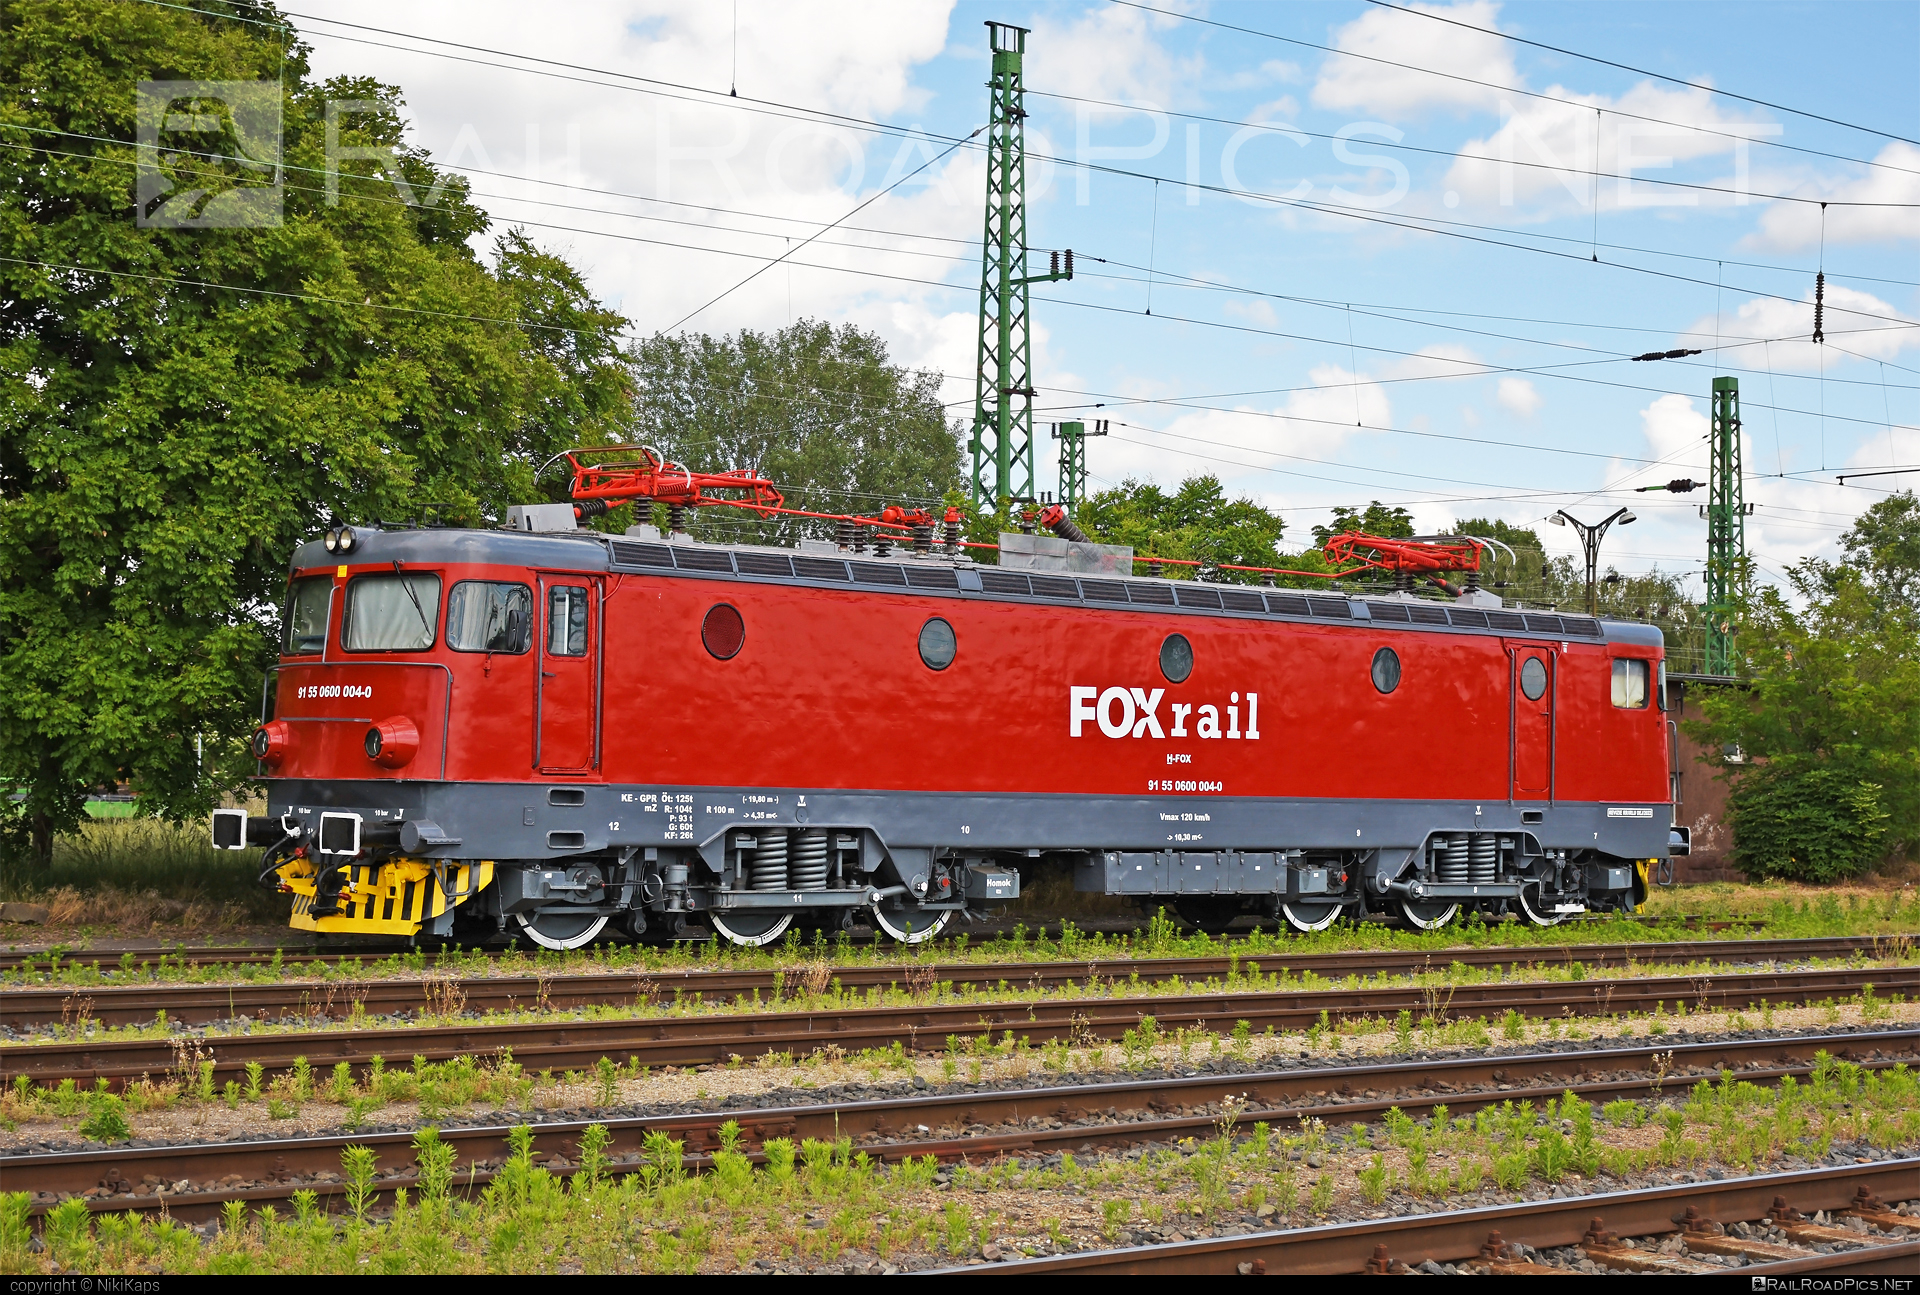 Electroputere LE 5100 - 600 004-0 operated by FOXrail Zrt. #electroputere #electroputerecraiova #electroputerele5100 #foxrail #le5100